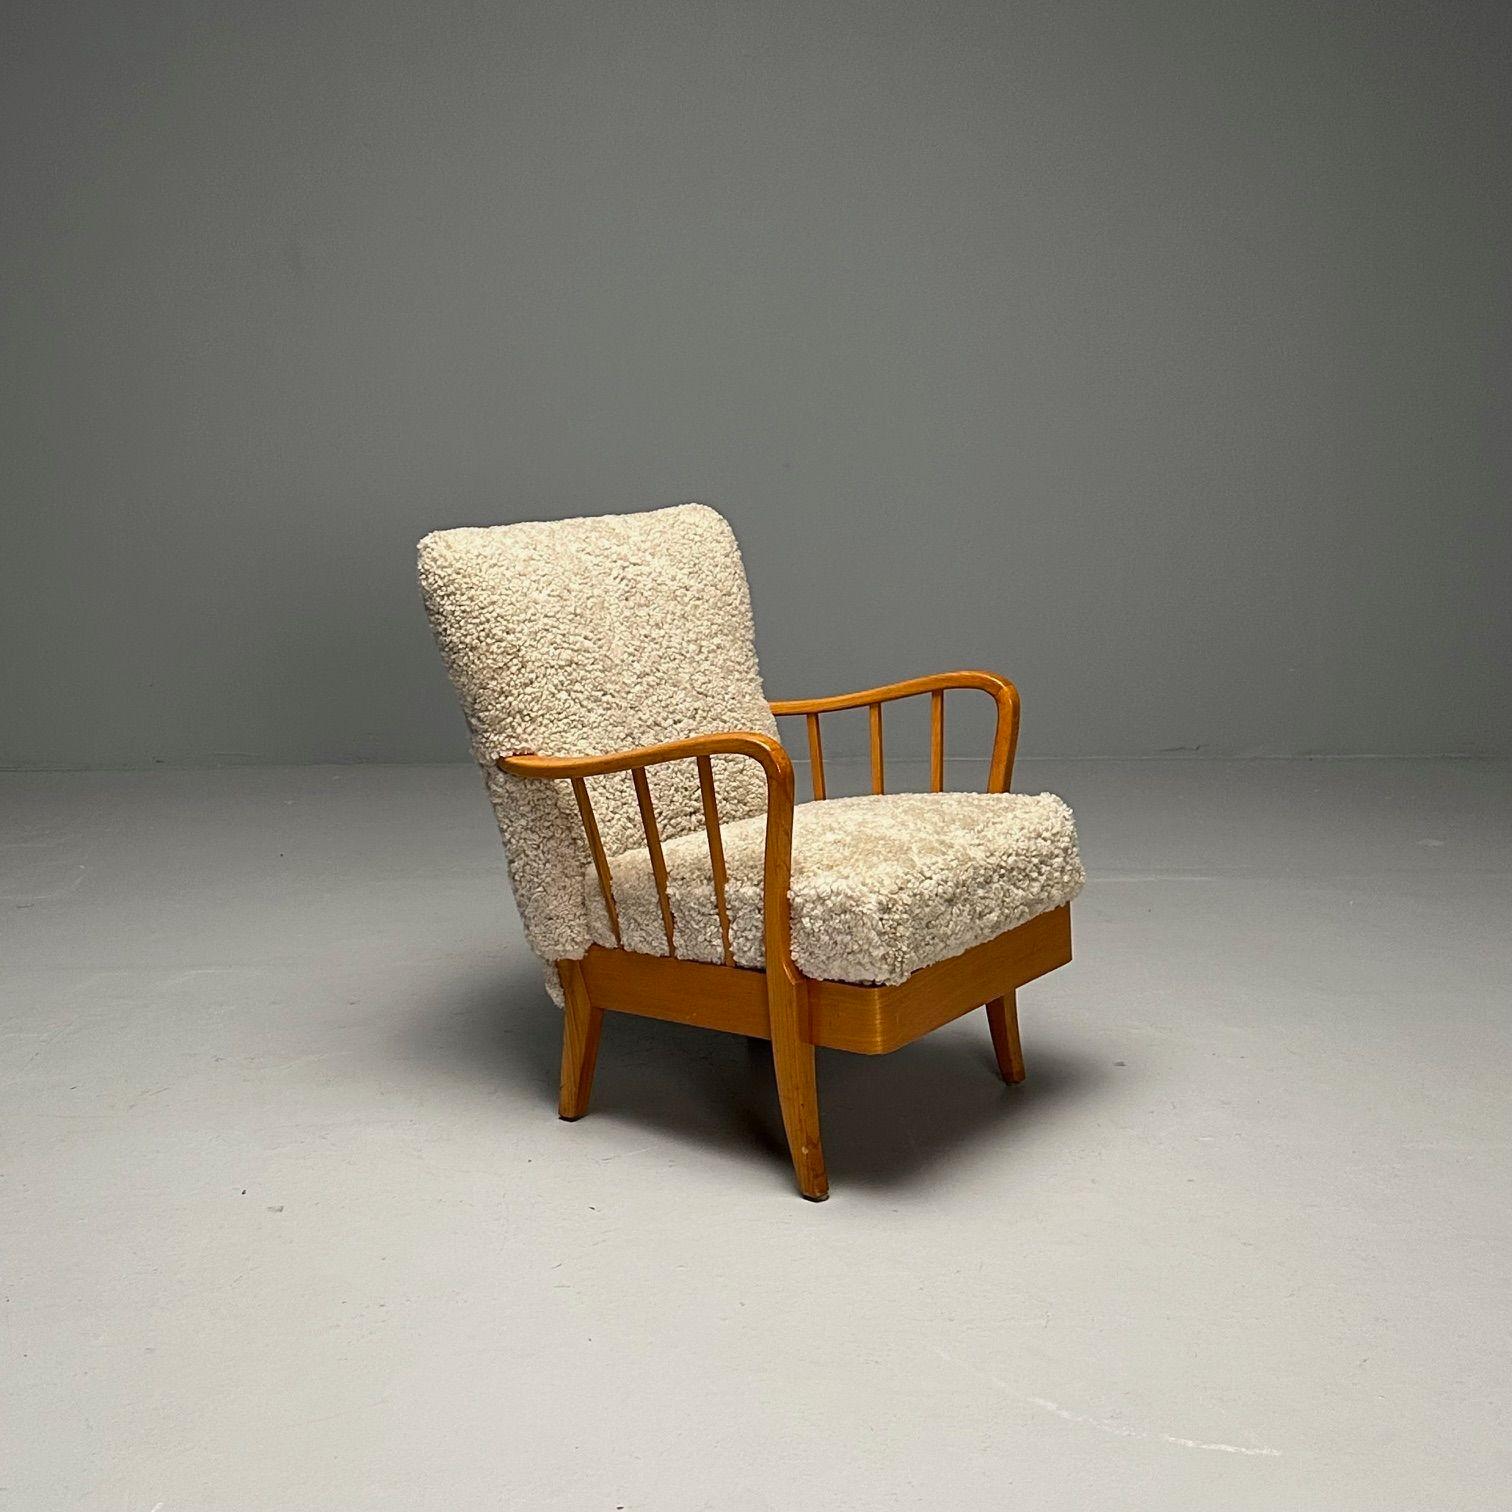 Alfred Christensen Style, Danish Mid-Century Modern Arm Chair, Shearling, Elm For Sale 2